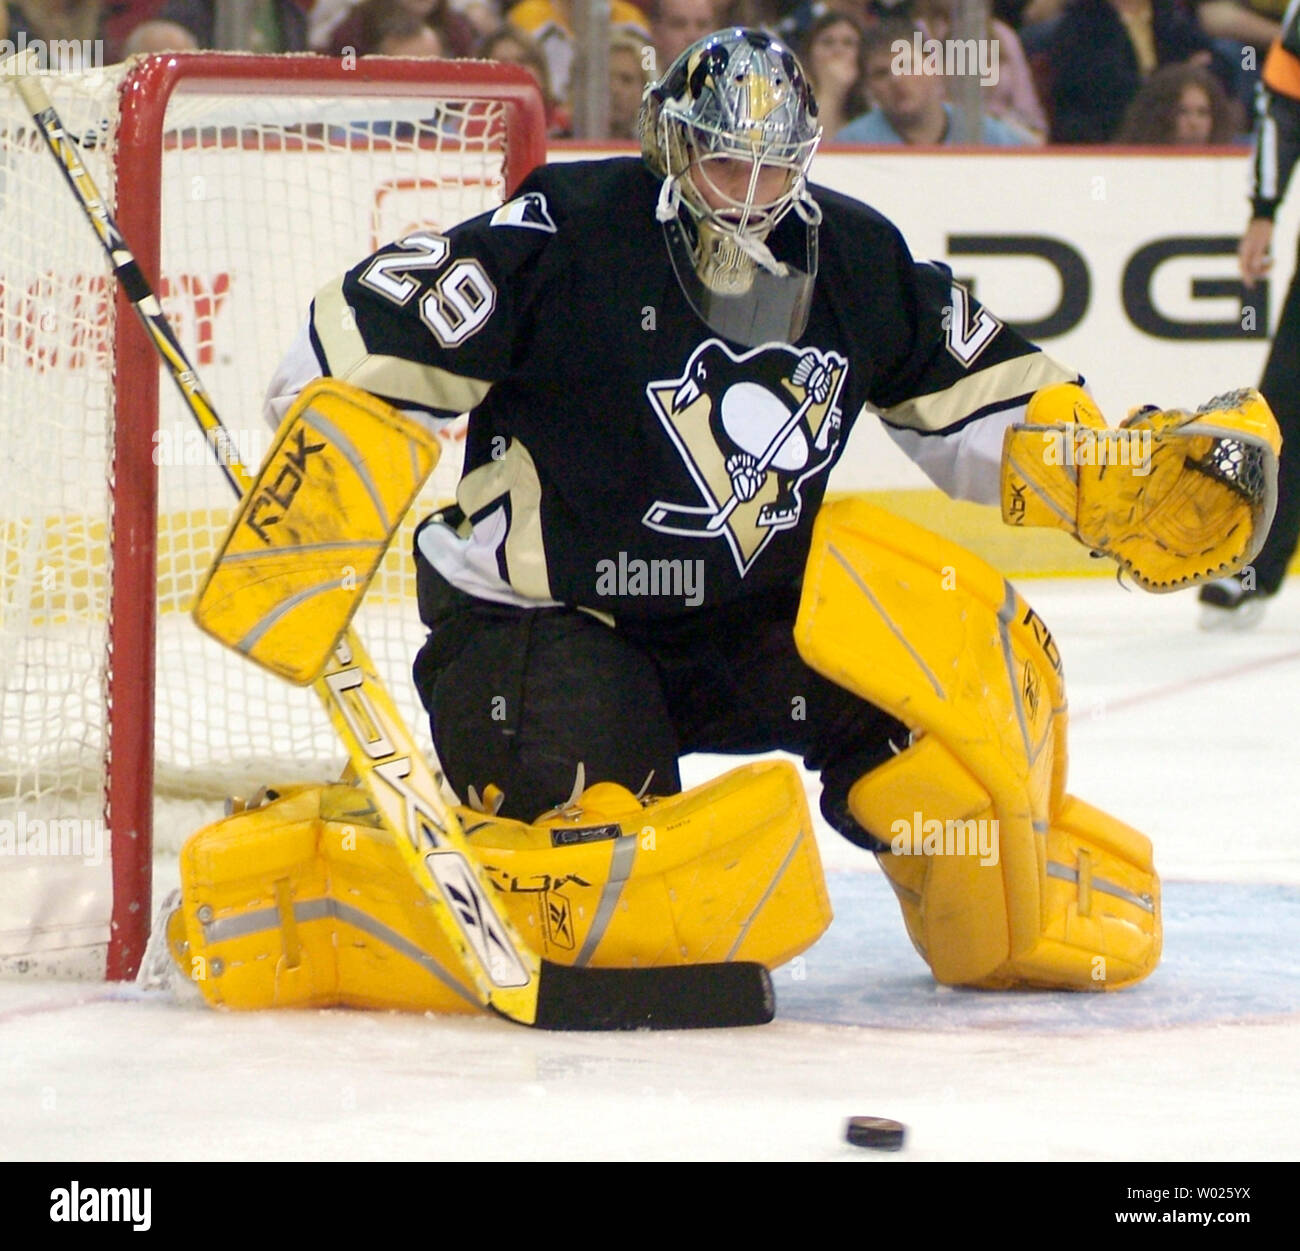 Source: Penguins not interested in reacquiring goalie Marc-Andre